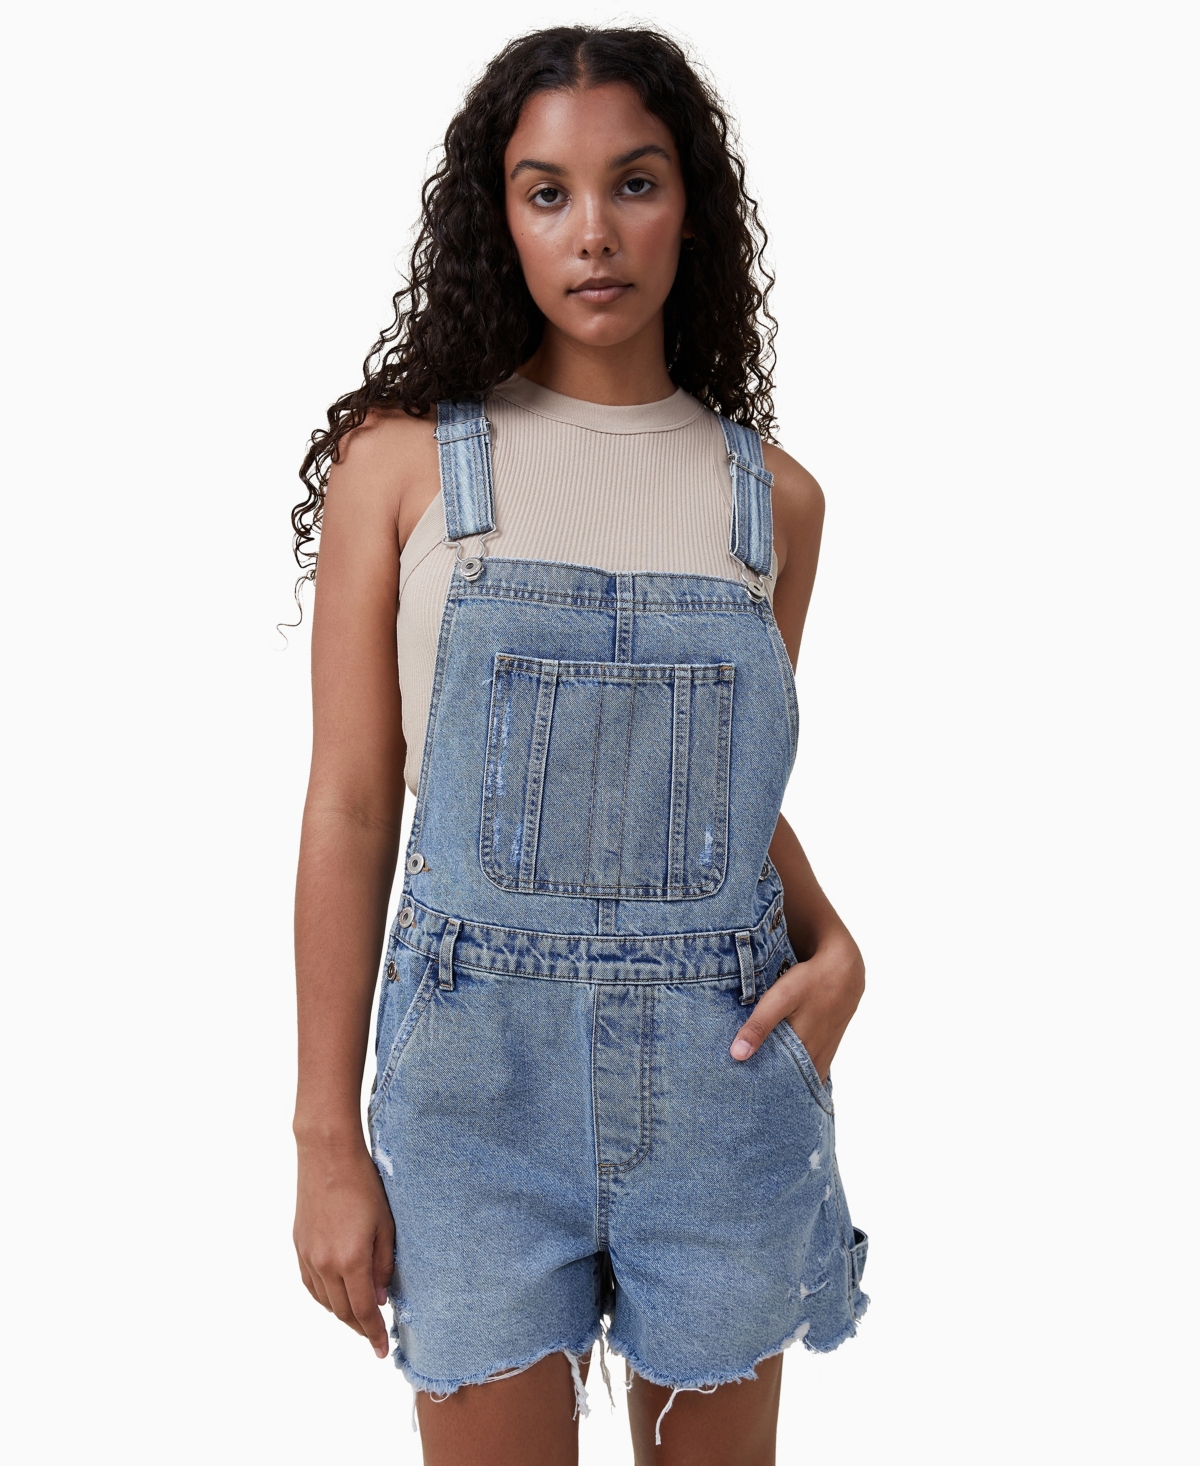 Cotton On Women's Utility Denim Overall Shorts In Surfers Blue Rip